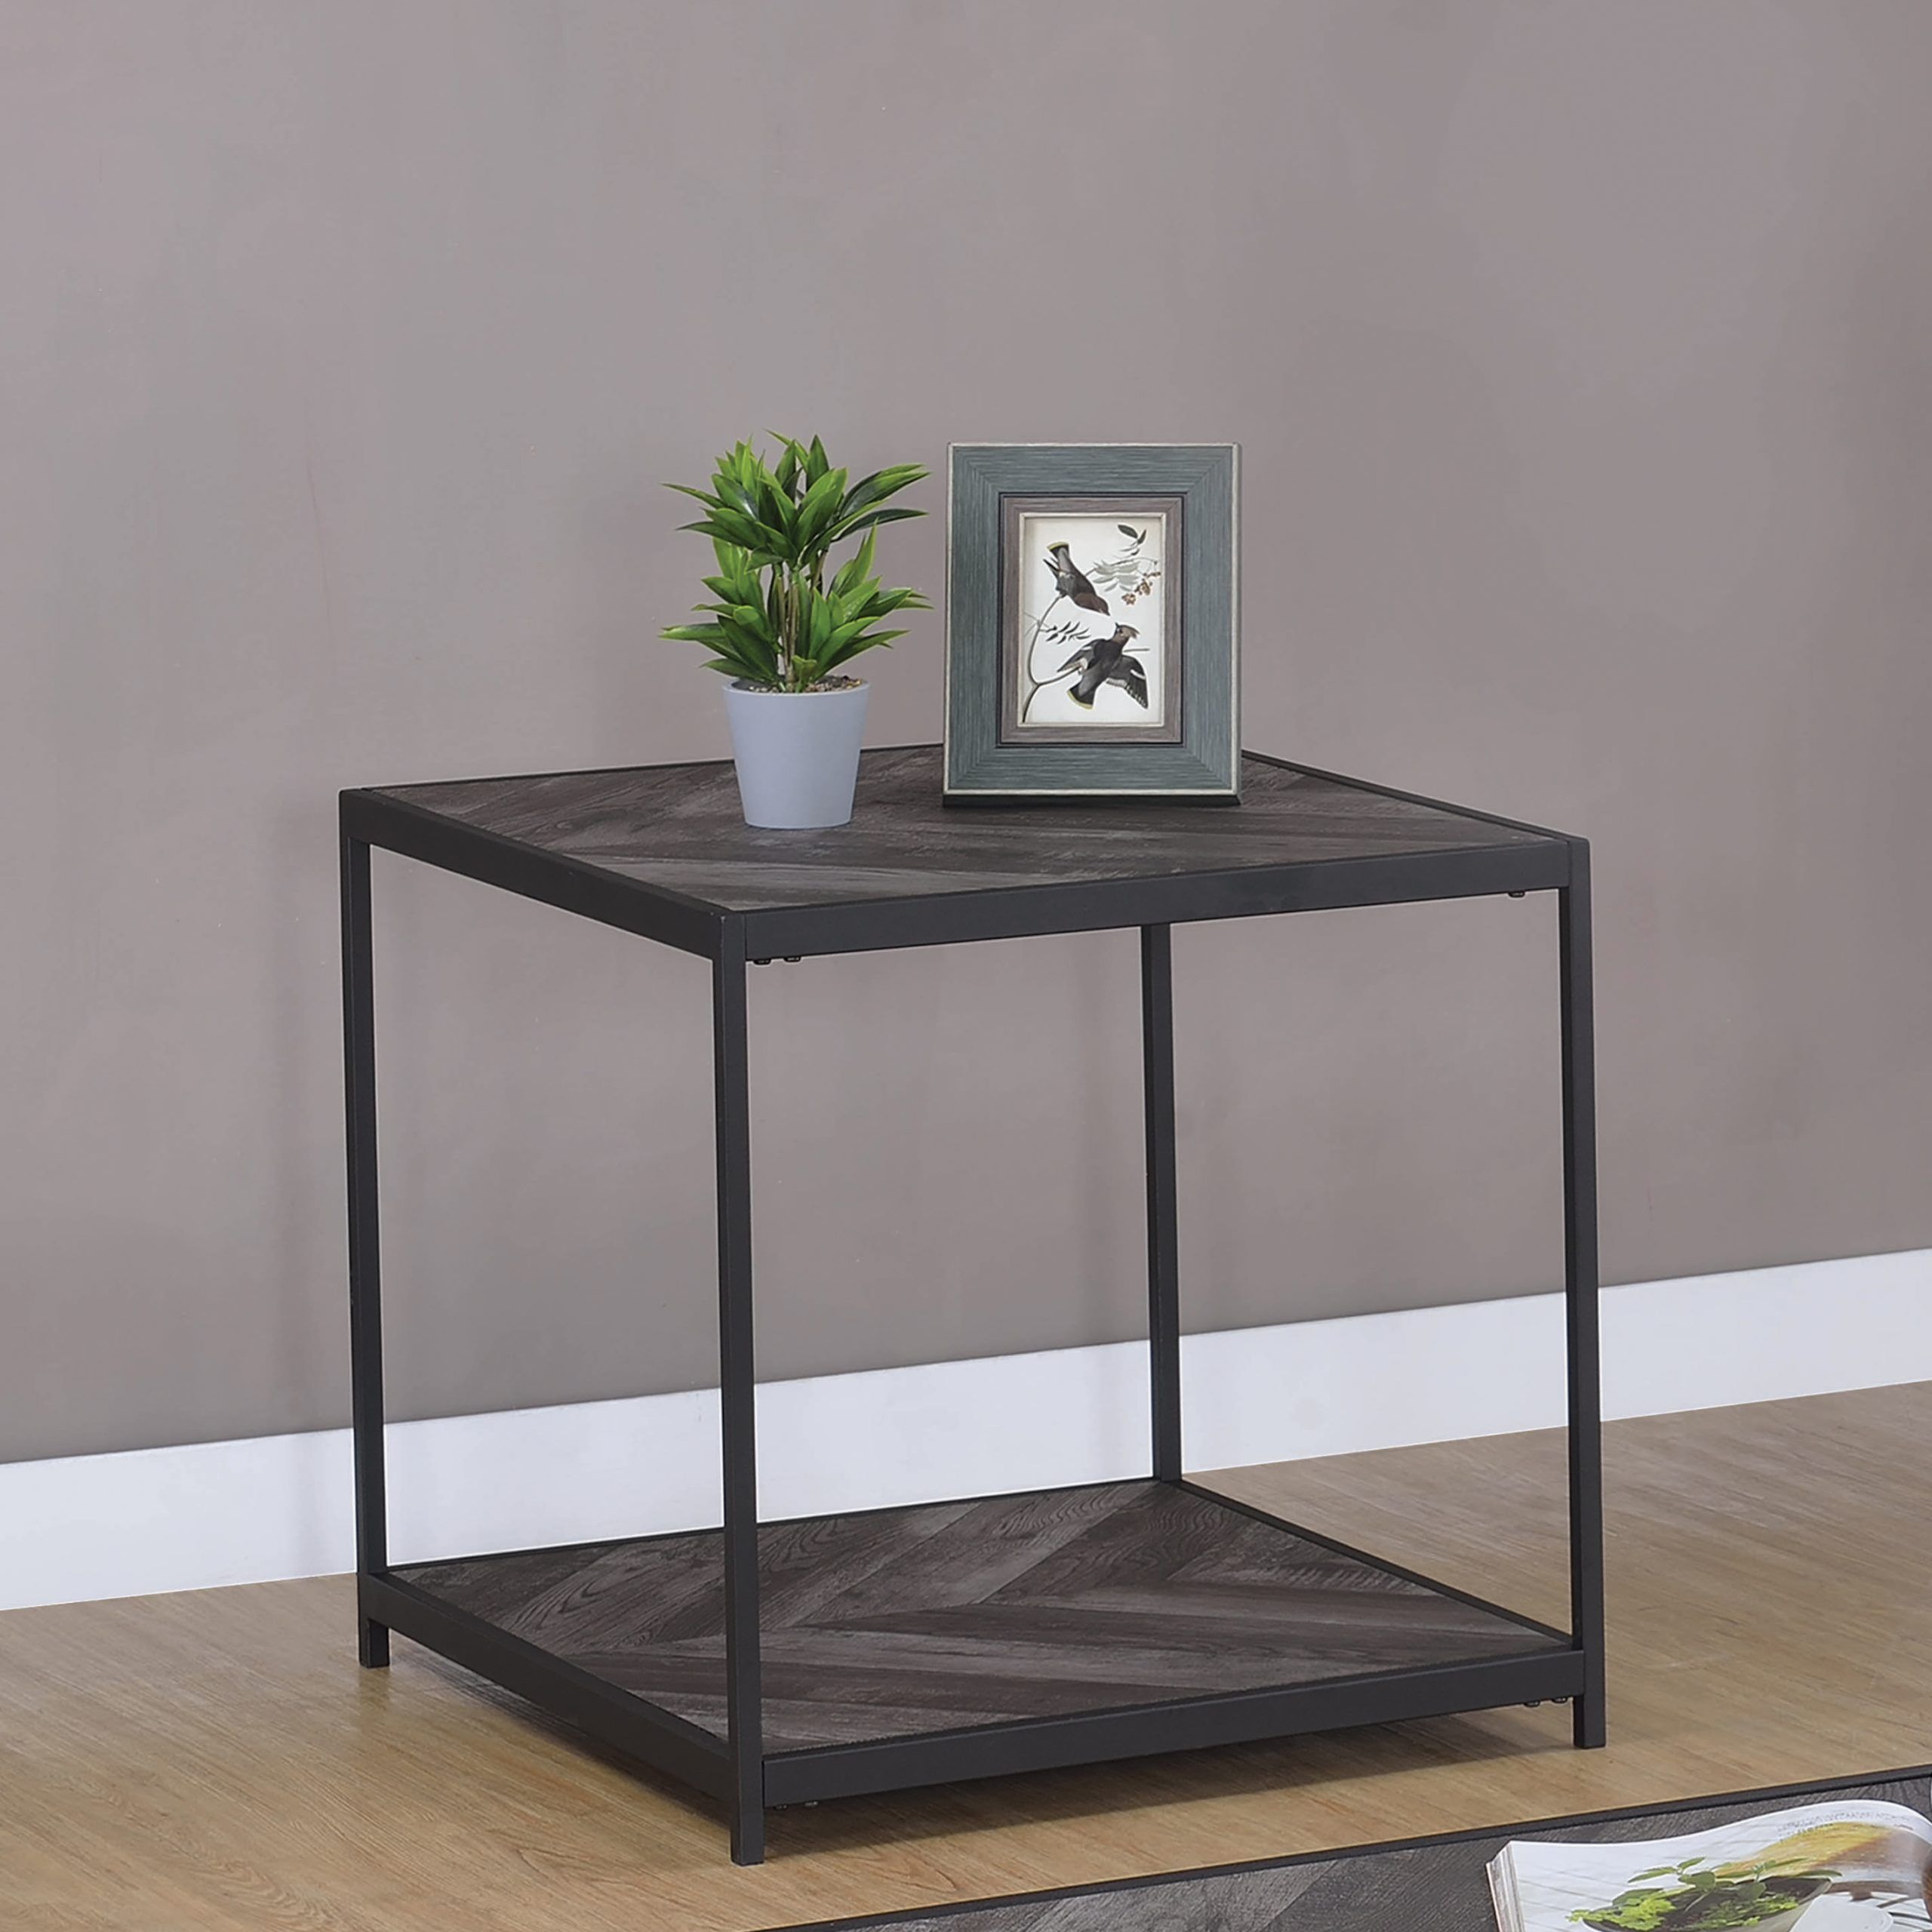 Beckley Chevron End Table Rustic Grey Herringbone – Coaster Pertaining To Rustic Gray End Tables (View 14 of 15)